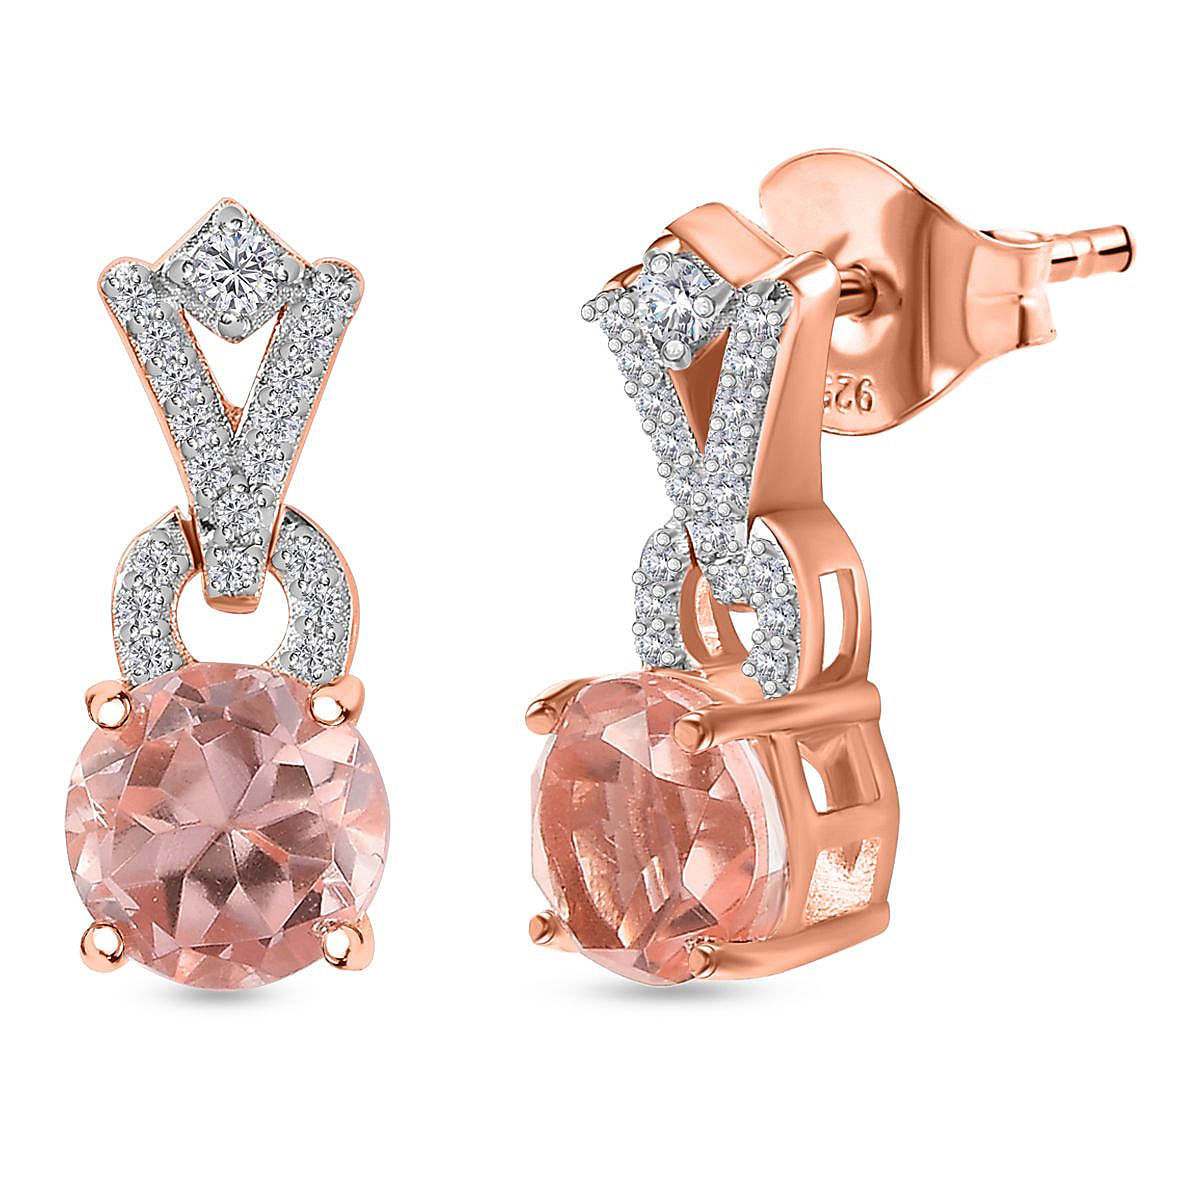 Morganite Color Quartz & Natural Zircon Earrings in 18K Rose Gold Vermeil Plated Sterling Silver 3.48 Ct.